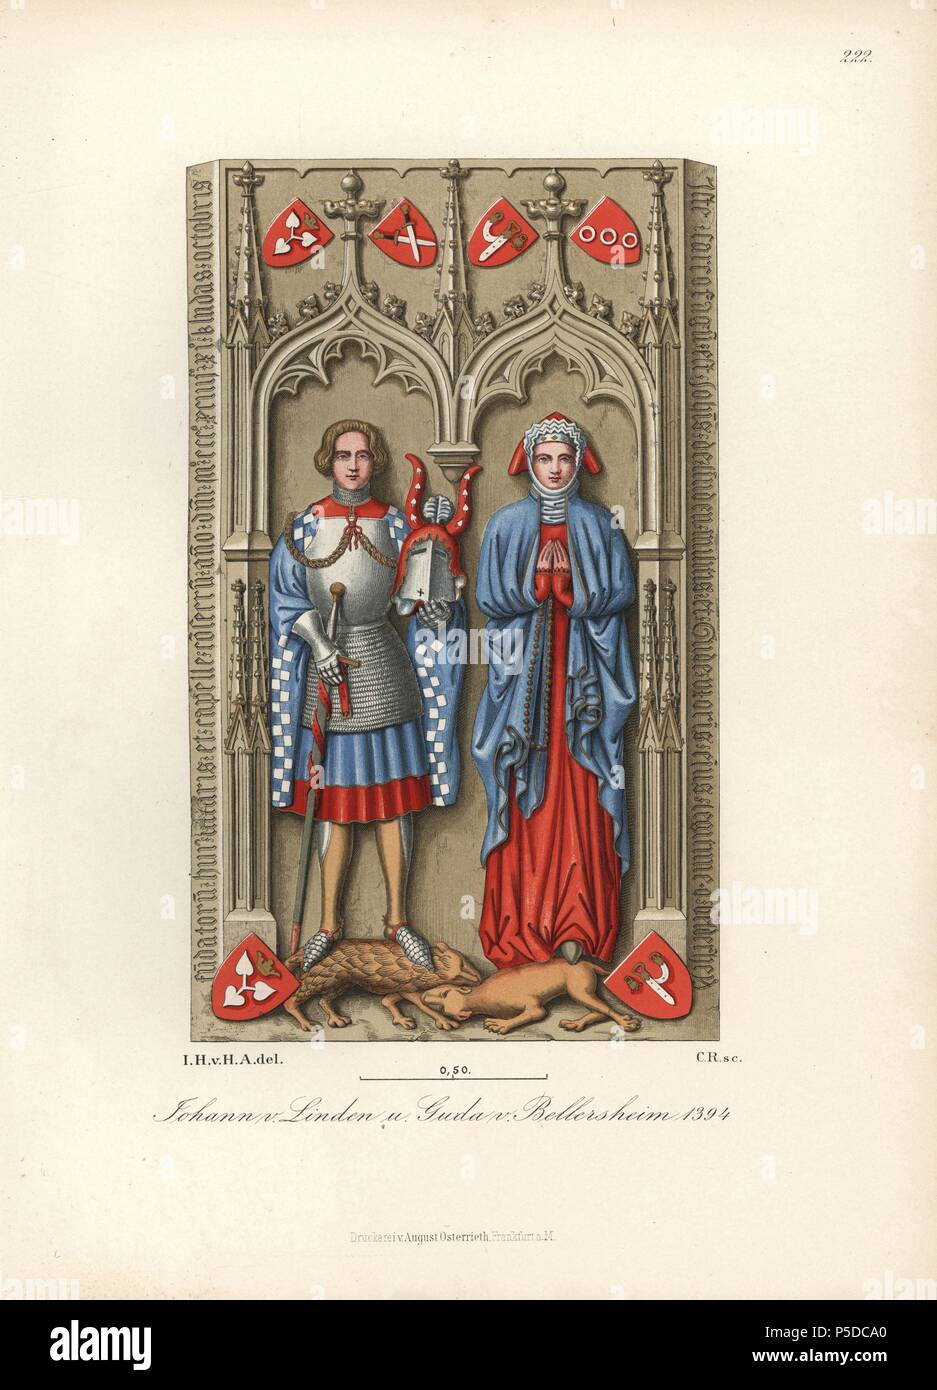 Battle armour and marriage clothes of Johann von Linden and Guda von  Bellersheim, 1394, from Kloster Urnsburg. Chromolithograph from  Hefner-Alteneck's "Costumes, Artworks and Appliances from the early Middle  Ages to the end